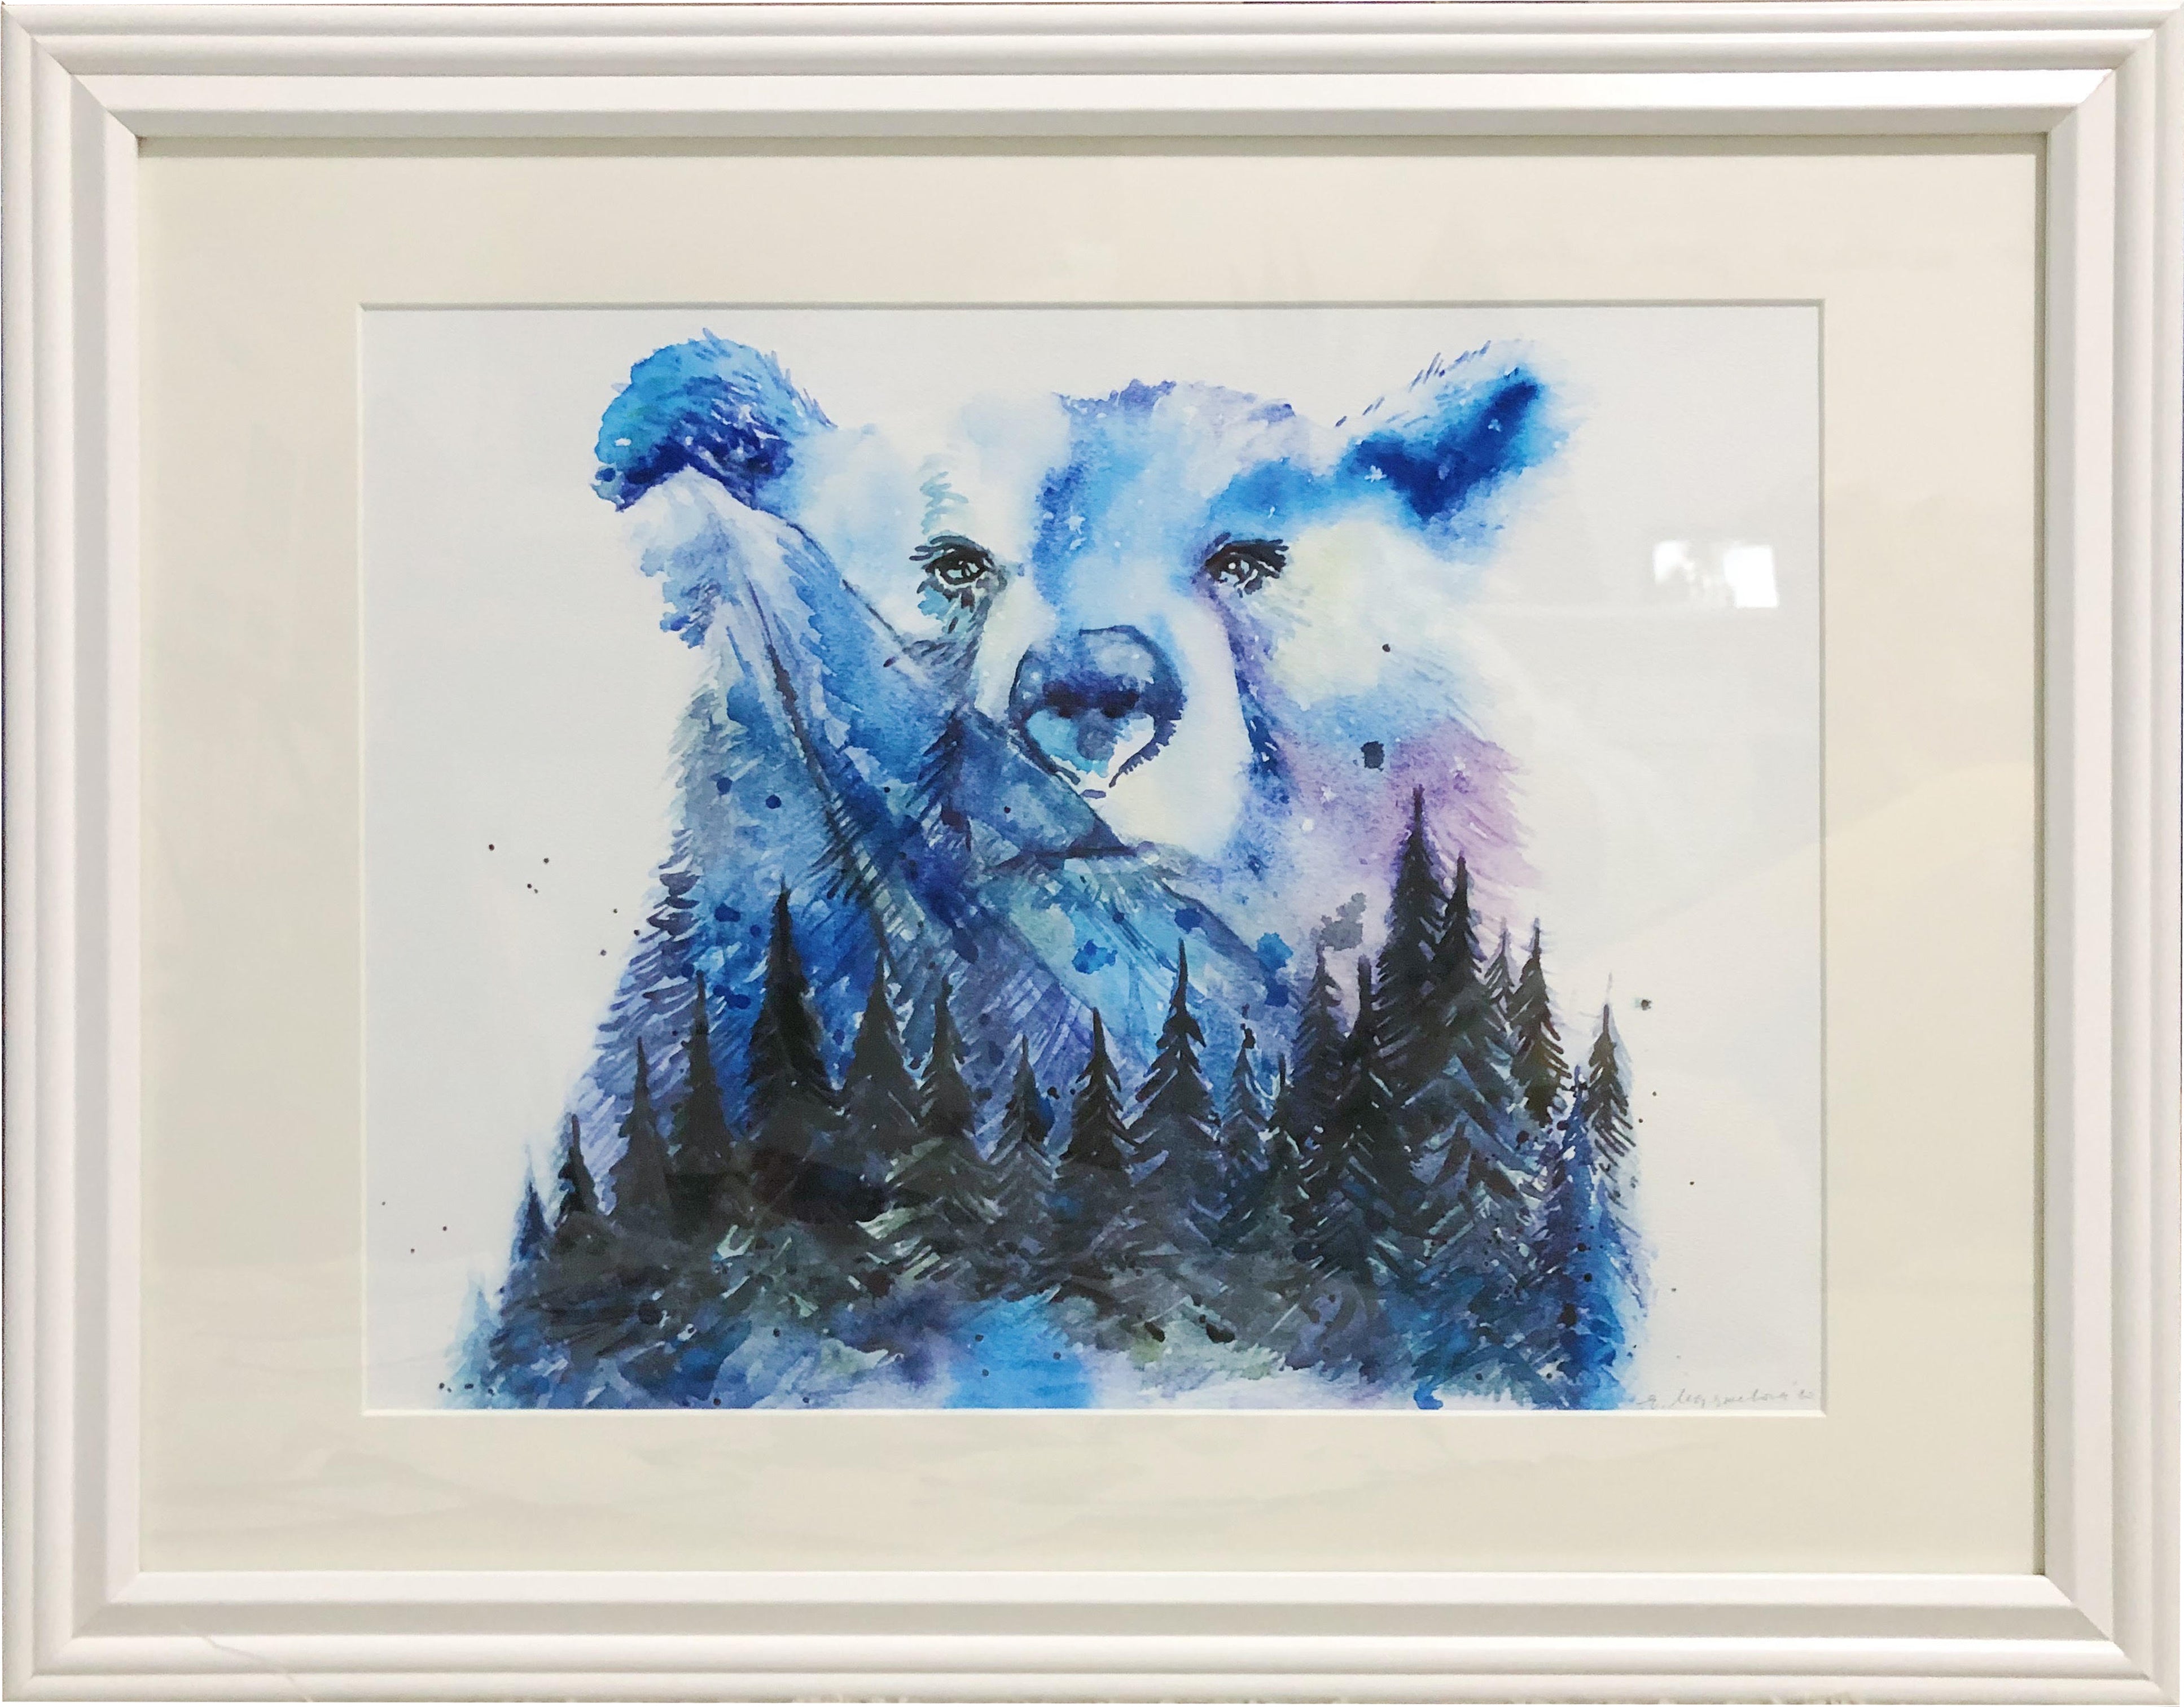 "Humphrey the Humpback" Whale Watercolor Art Print - Double Exposure Painting